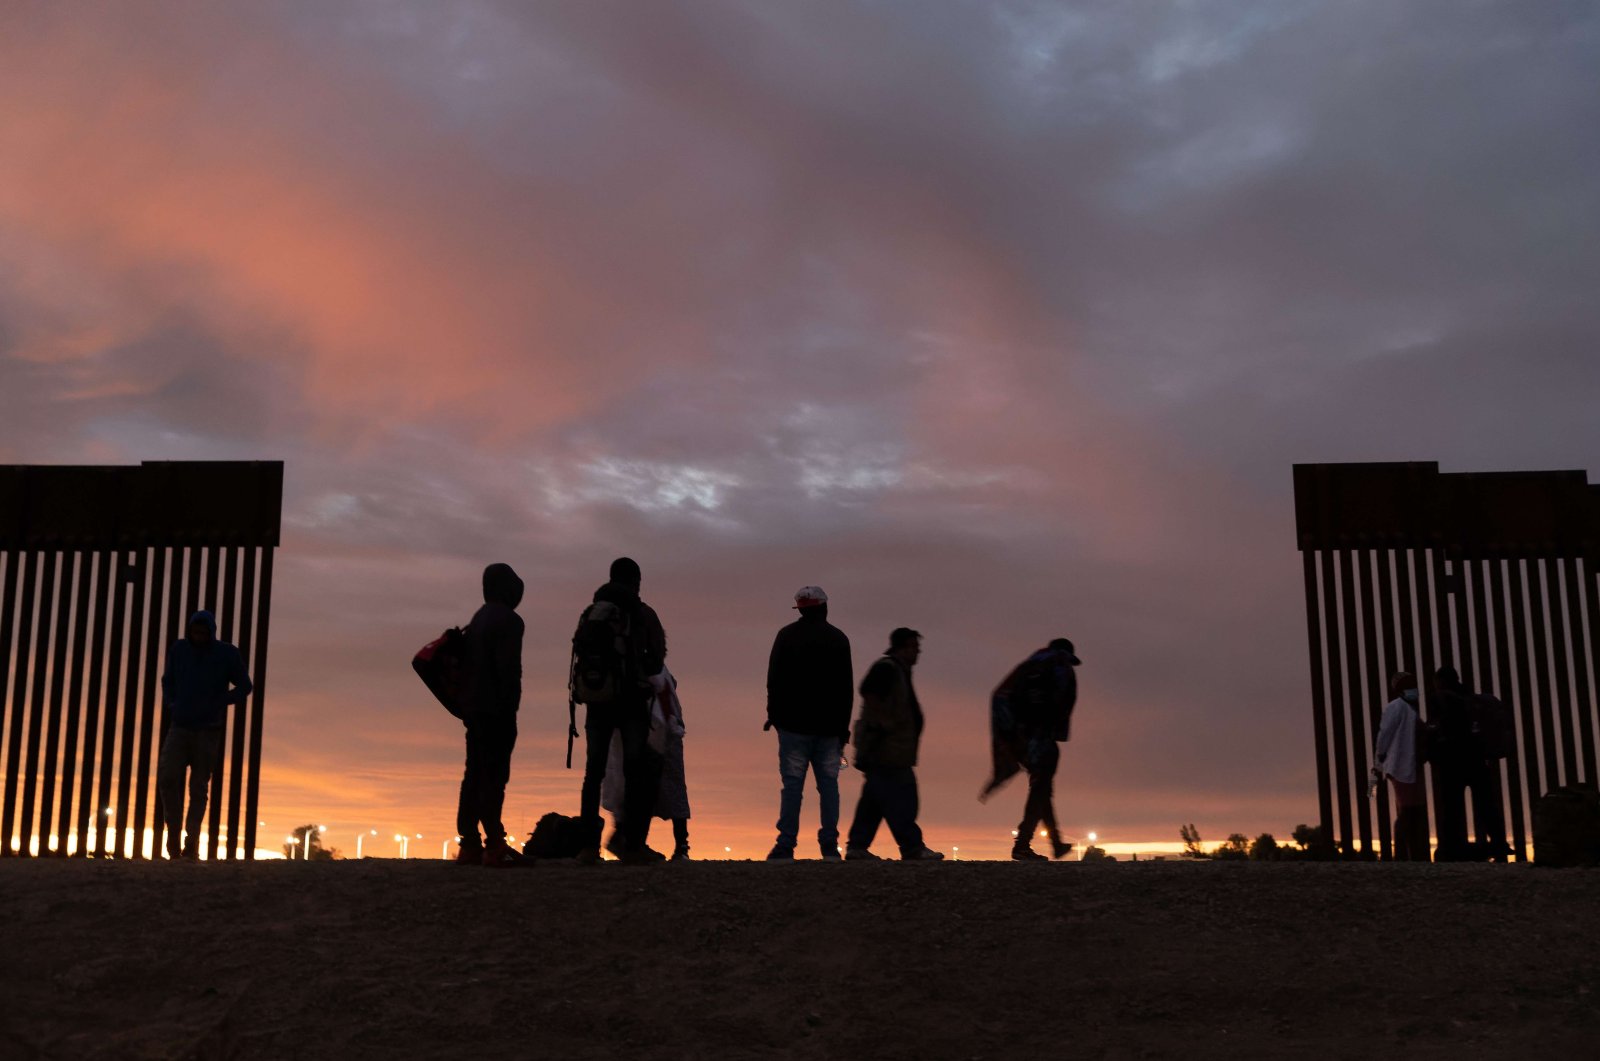 Parents-to-be from Haiti stand at a gap in the U.S.-Mexico border wall after having traveled from South America to the United States, Dec. 10, 2021 in Yuma, Arizona. (AFP Photo)